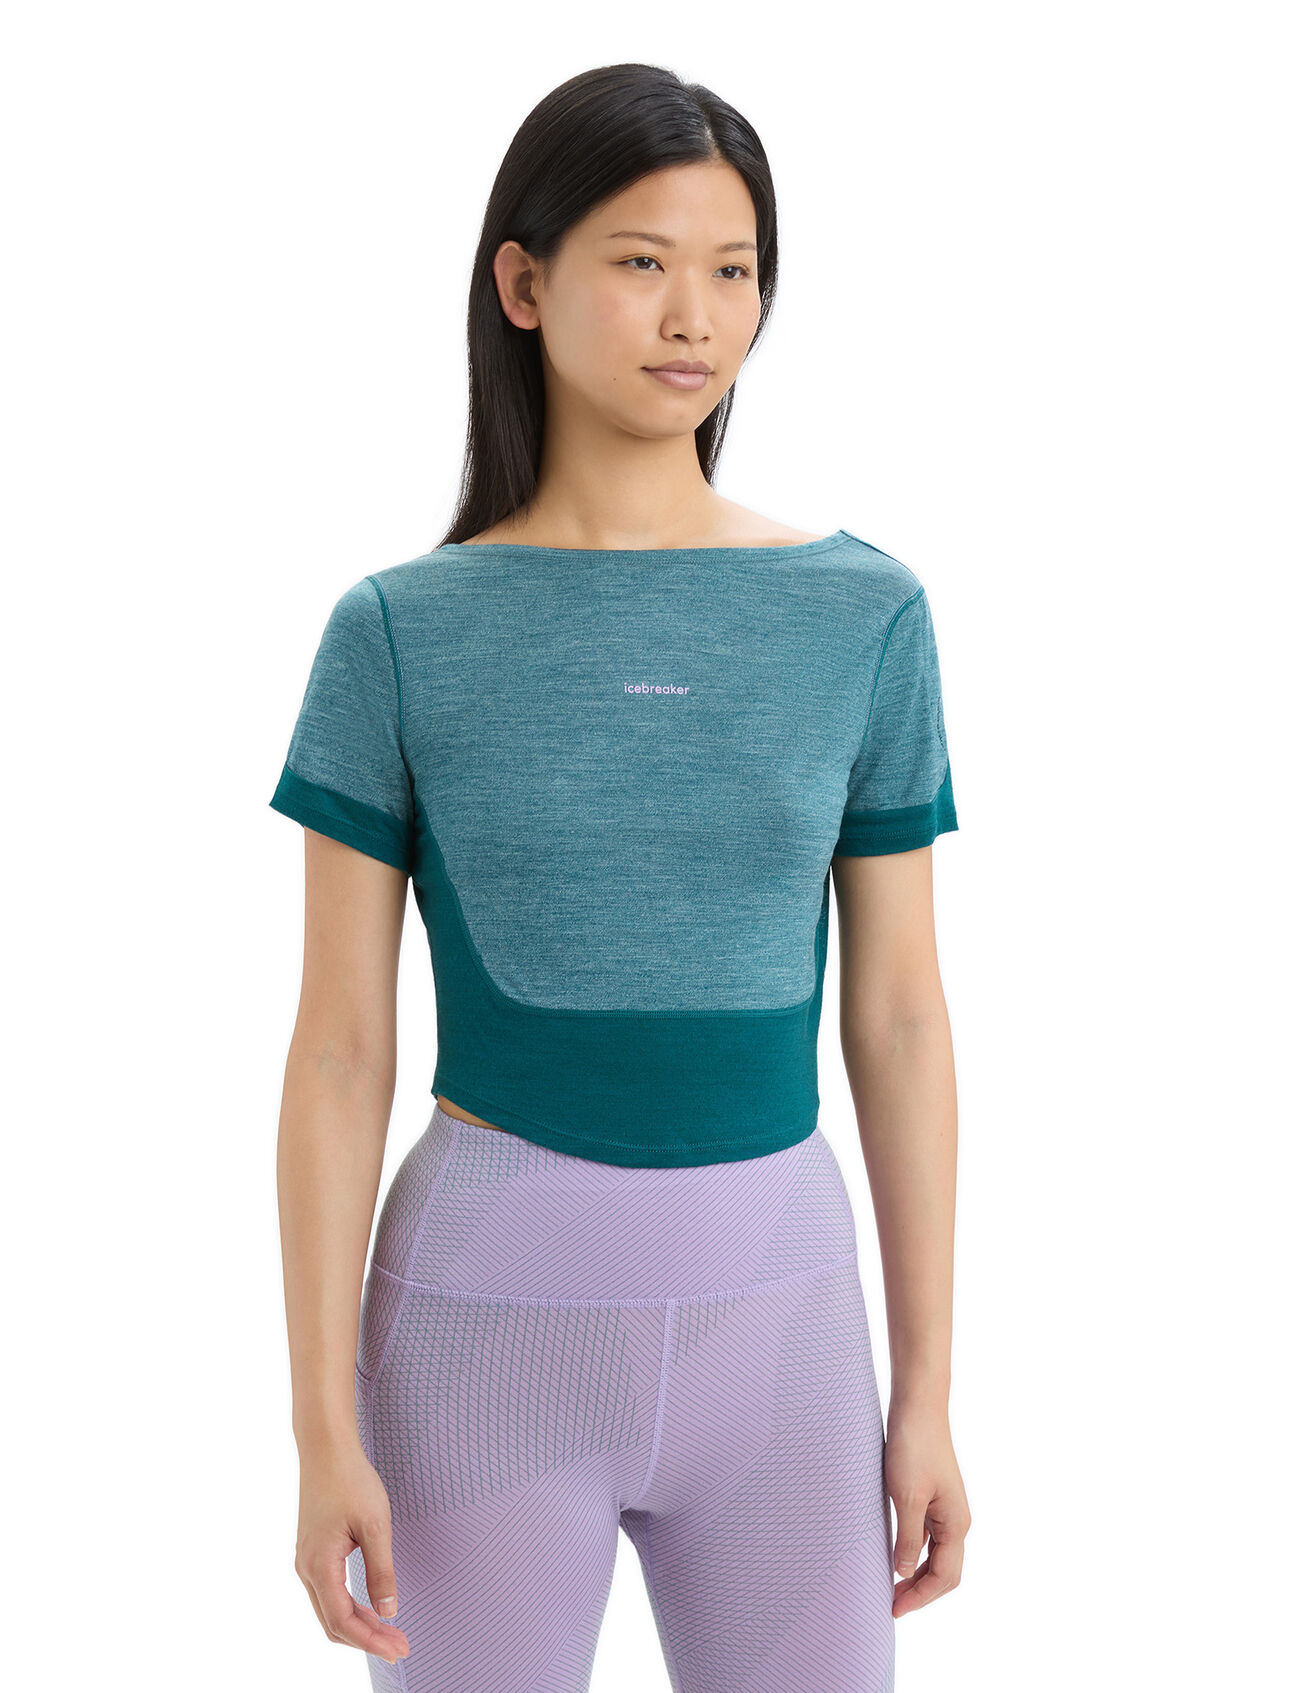 Womens ZoneKnit™ Merino Short Sleeve Scoop Back T-Shirt Our most breathable tech tee for high-exertion training and fast-paced adventures, the ZoneKnit™ Short Sleeve Scoop Back Tee features merino eyelet mesh in key areas for maximum ventilation.